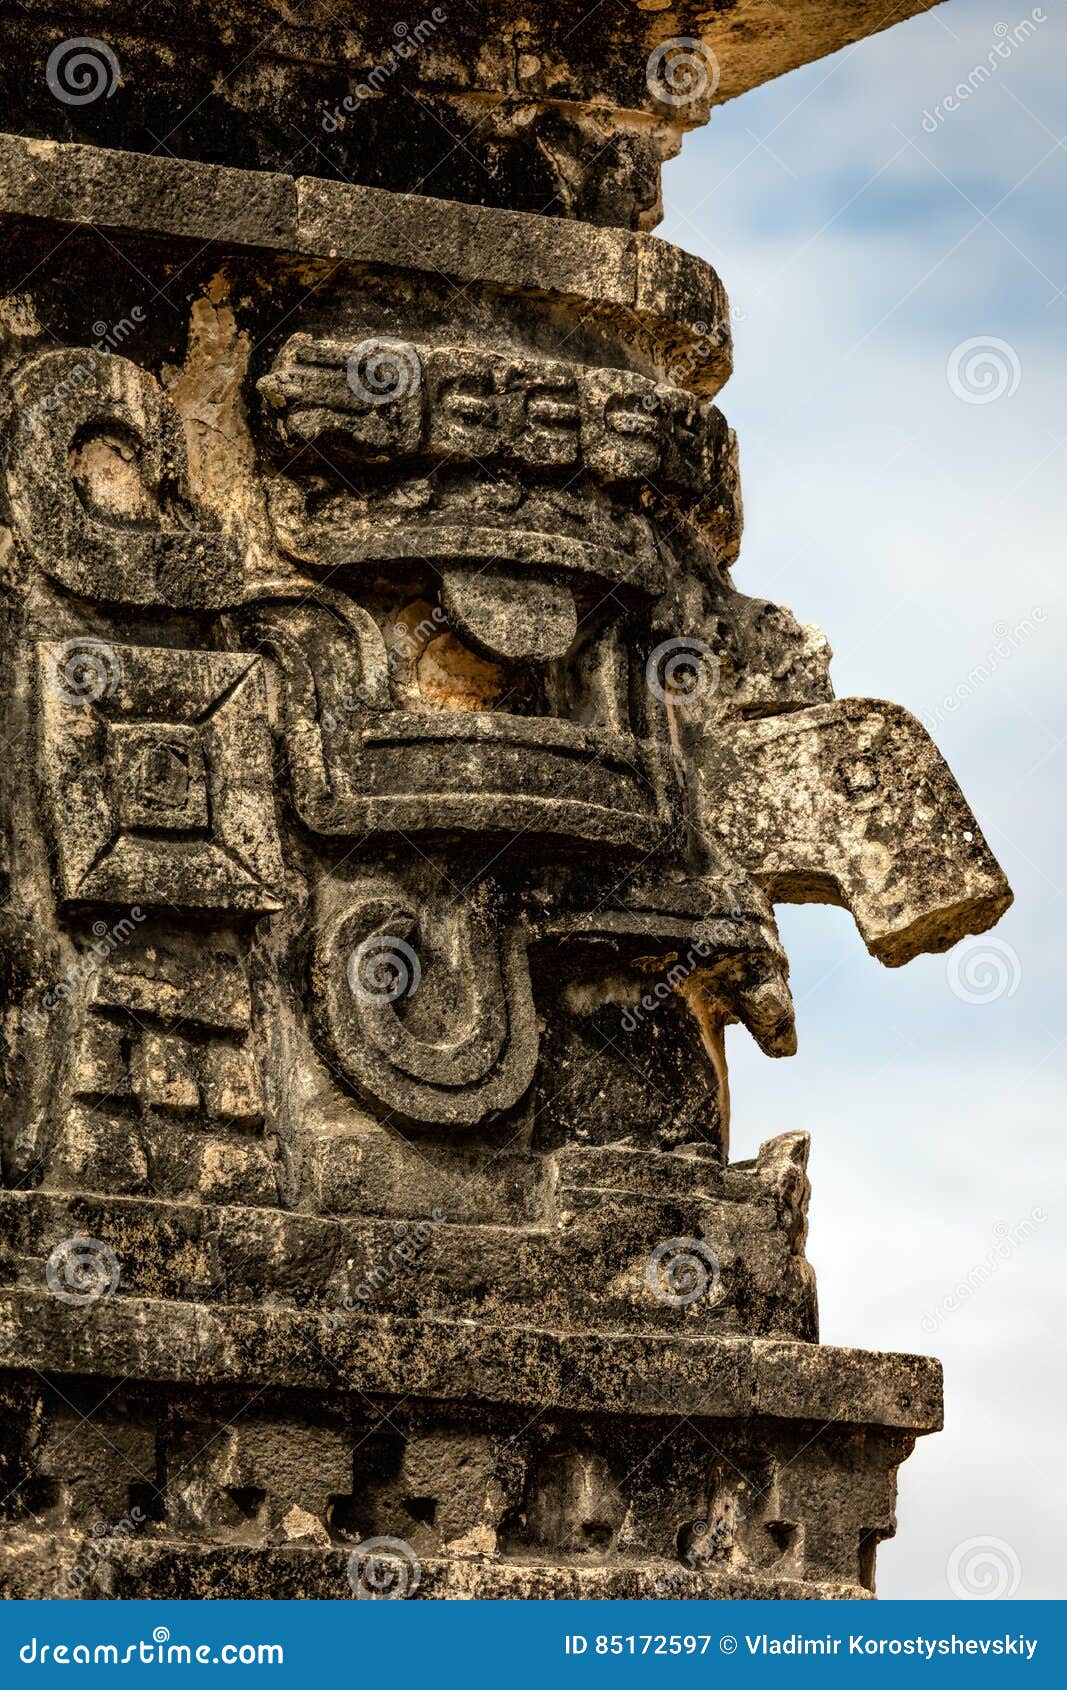 mask of chac, the ancient mayan god of rain and lightning